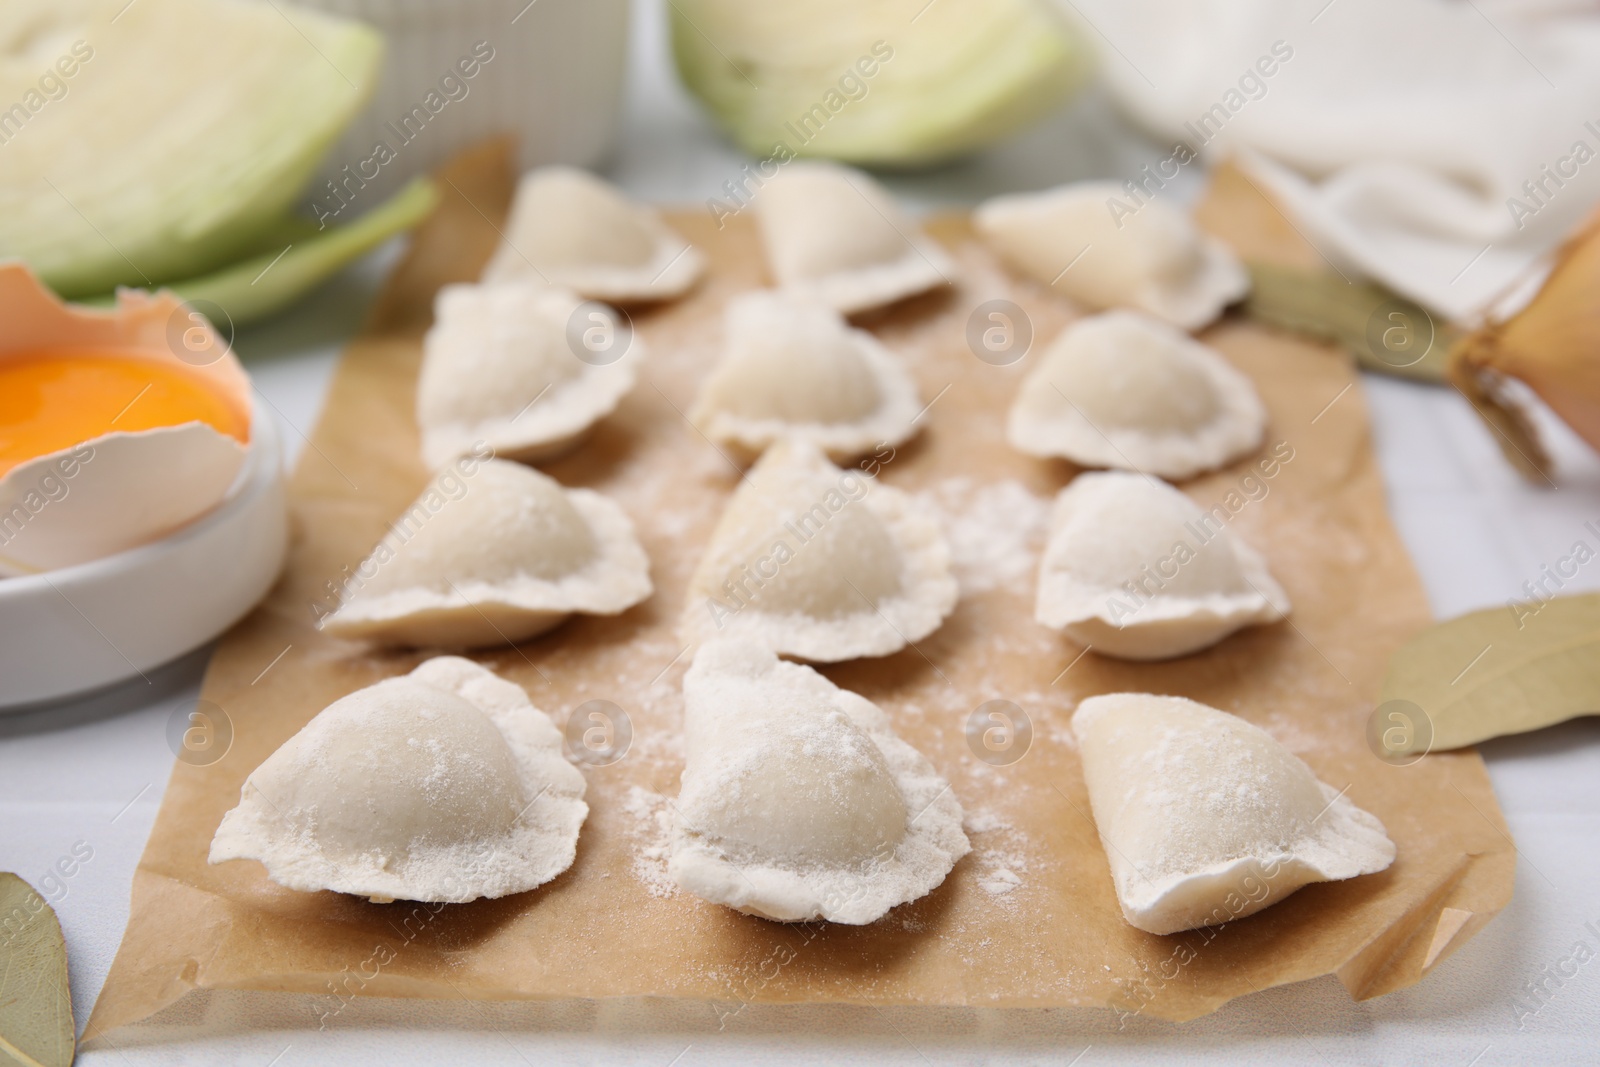 Photo of Raw dumplings (varenyky) with tasty filling and flour on parchment paper, closeup